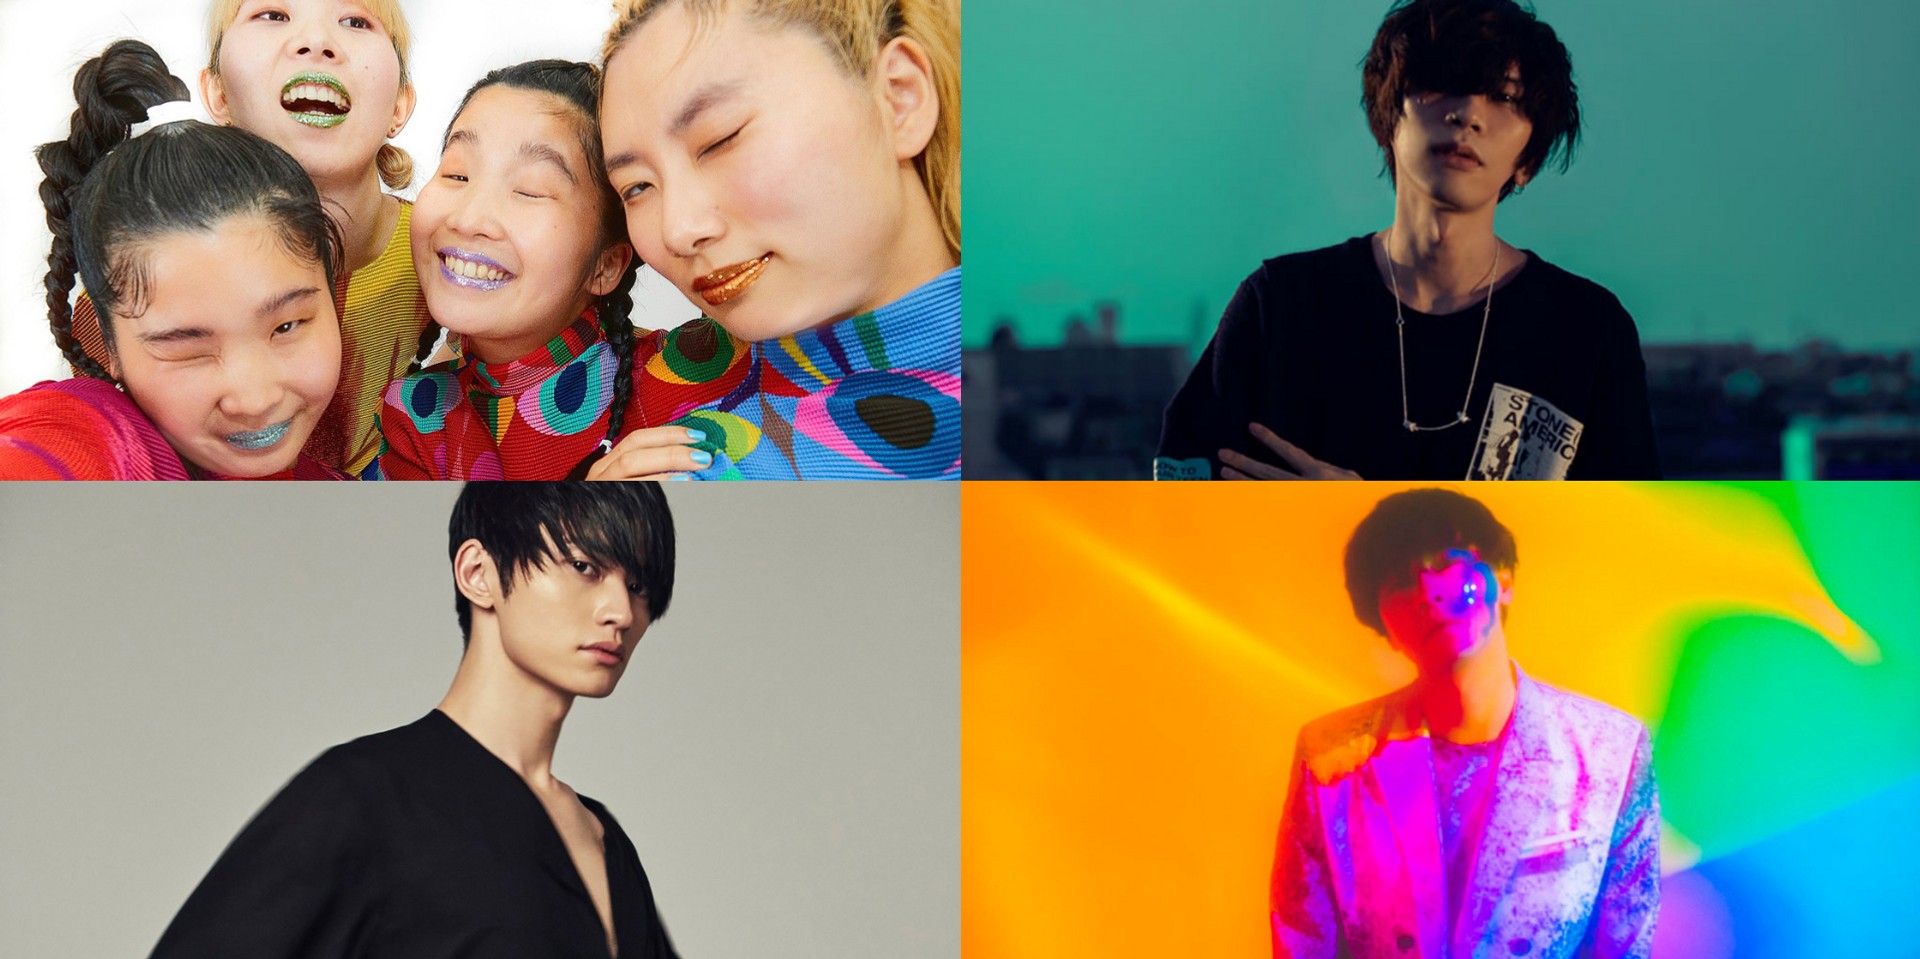 CHAI, ROTH BART BARON, Kenshi Yonezu, SKY-HI, and more nominated for Space Shower Music Awards 2021